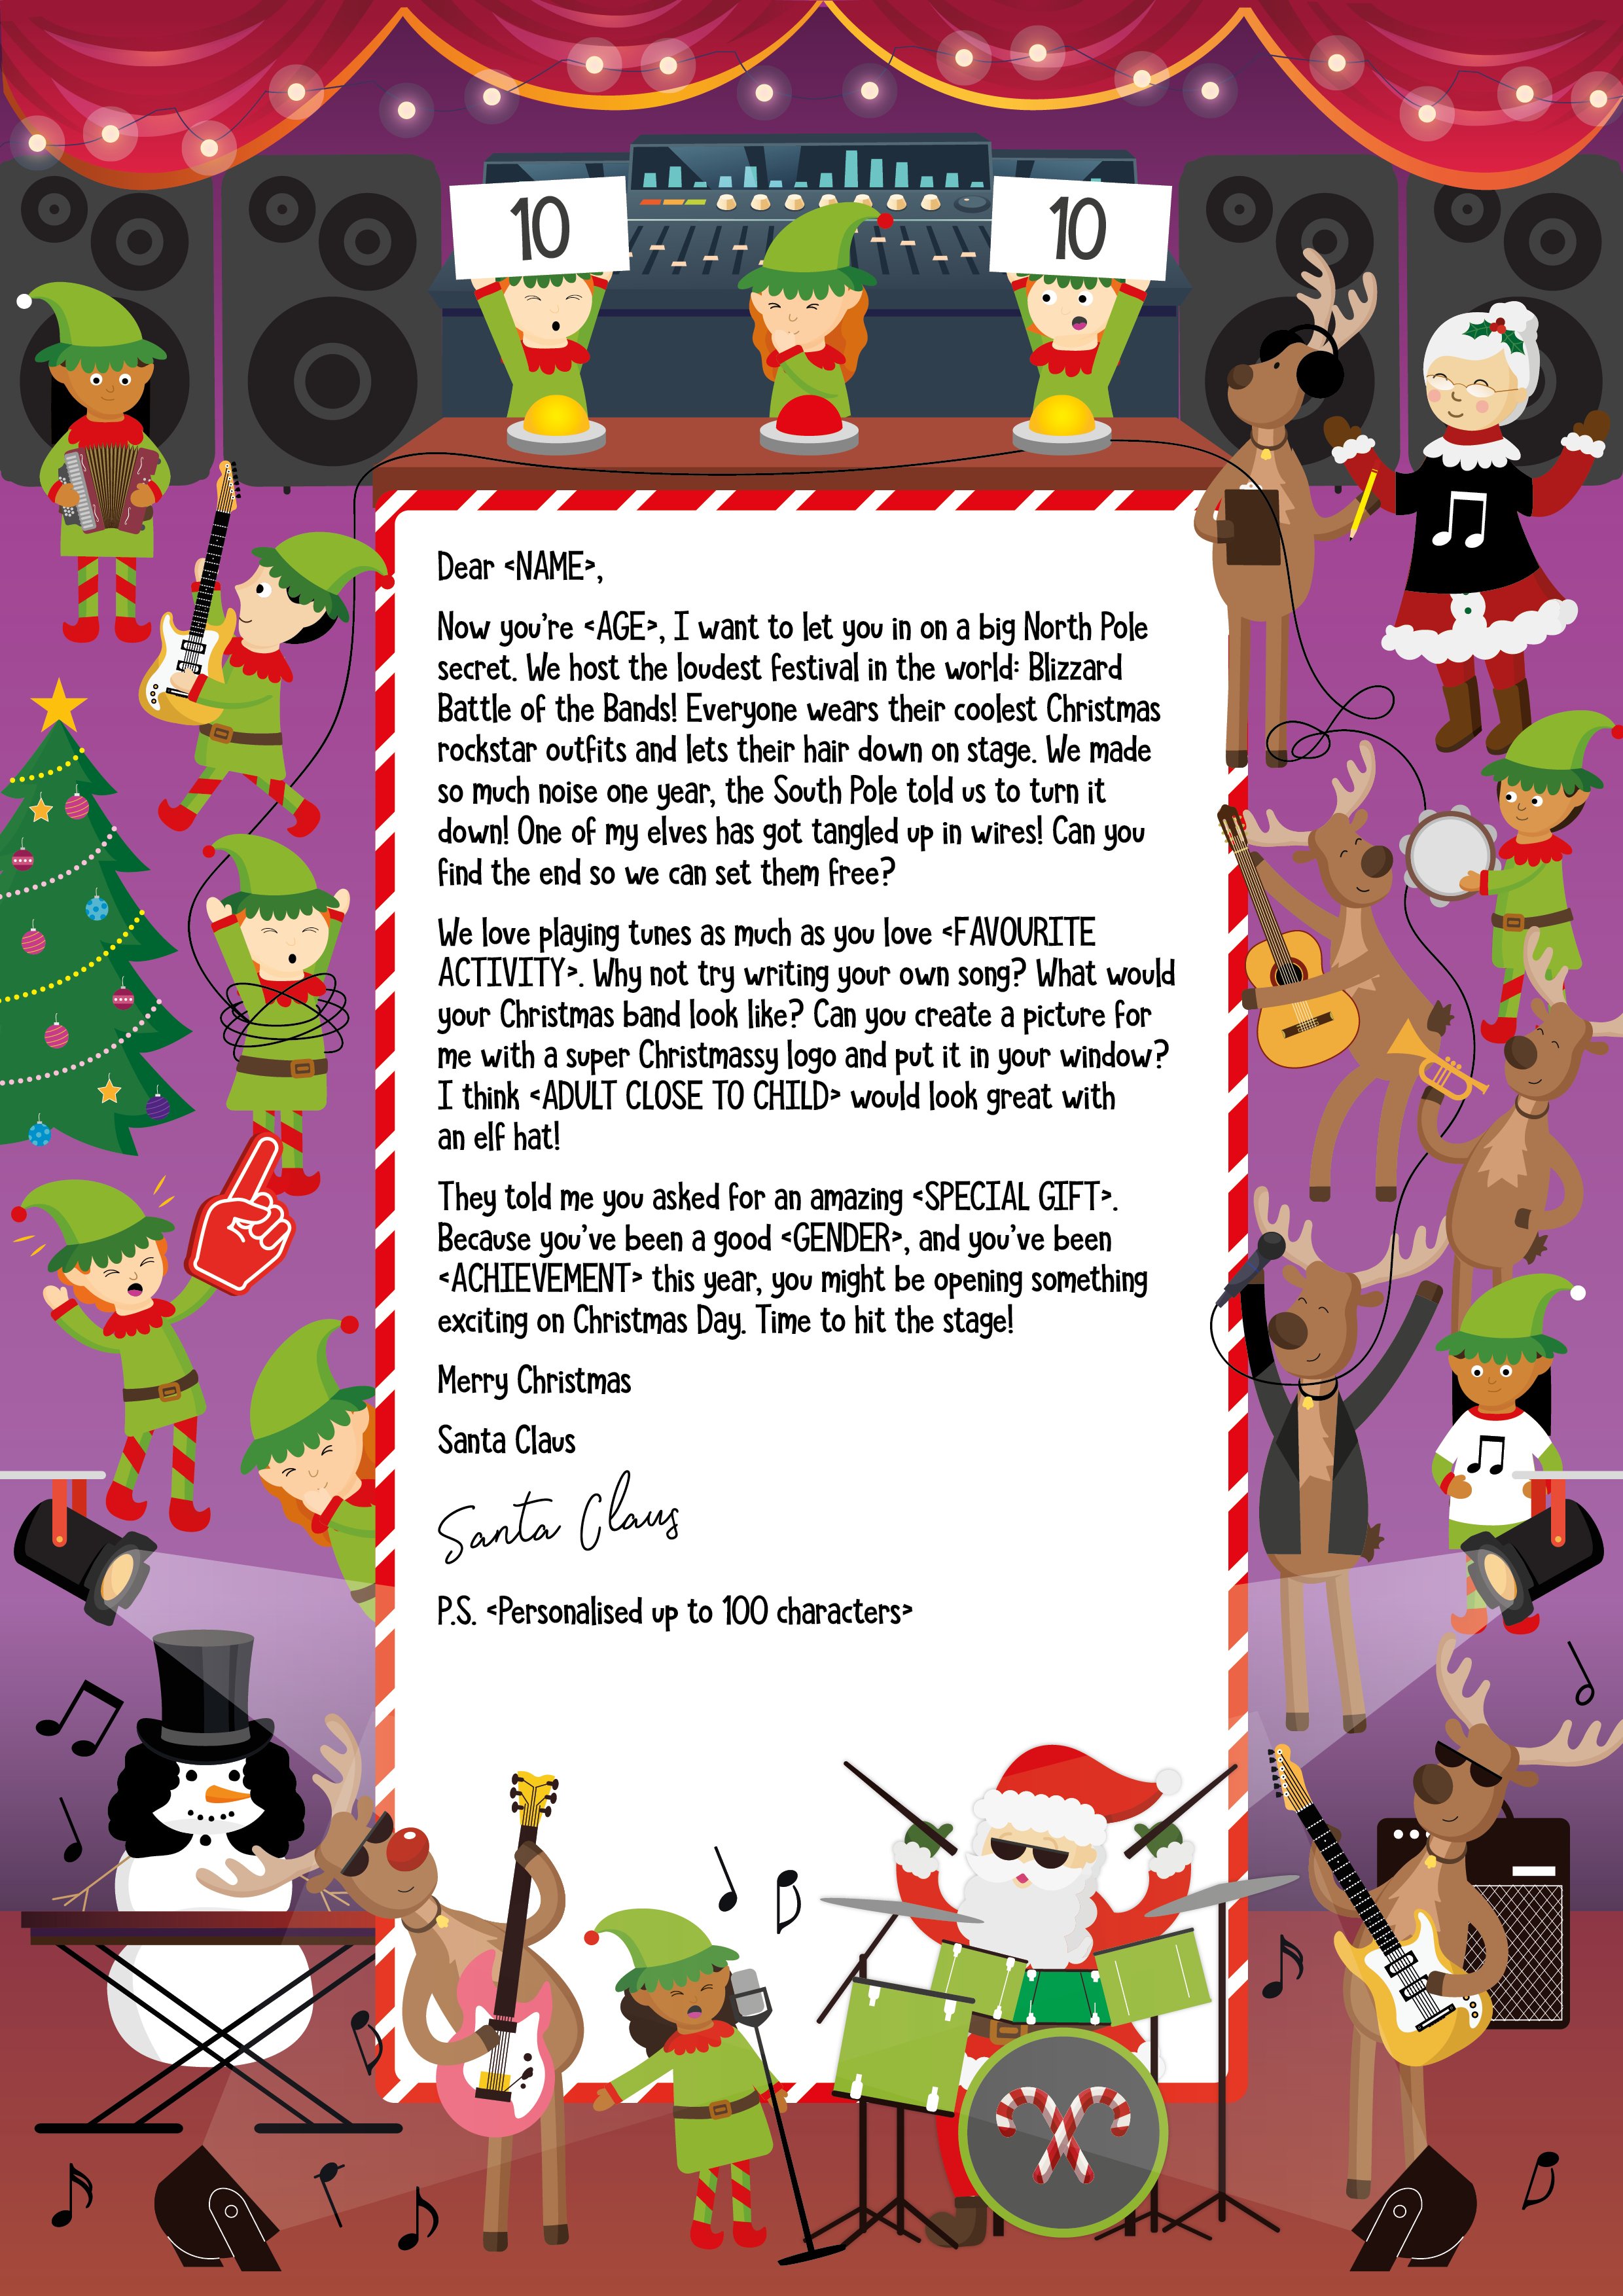 34116_art_NSPCC_Christmas_Letter_2021_Battle_of_The_Bands_210x297mm_ENG.jpg